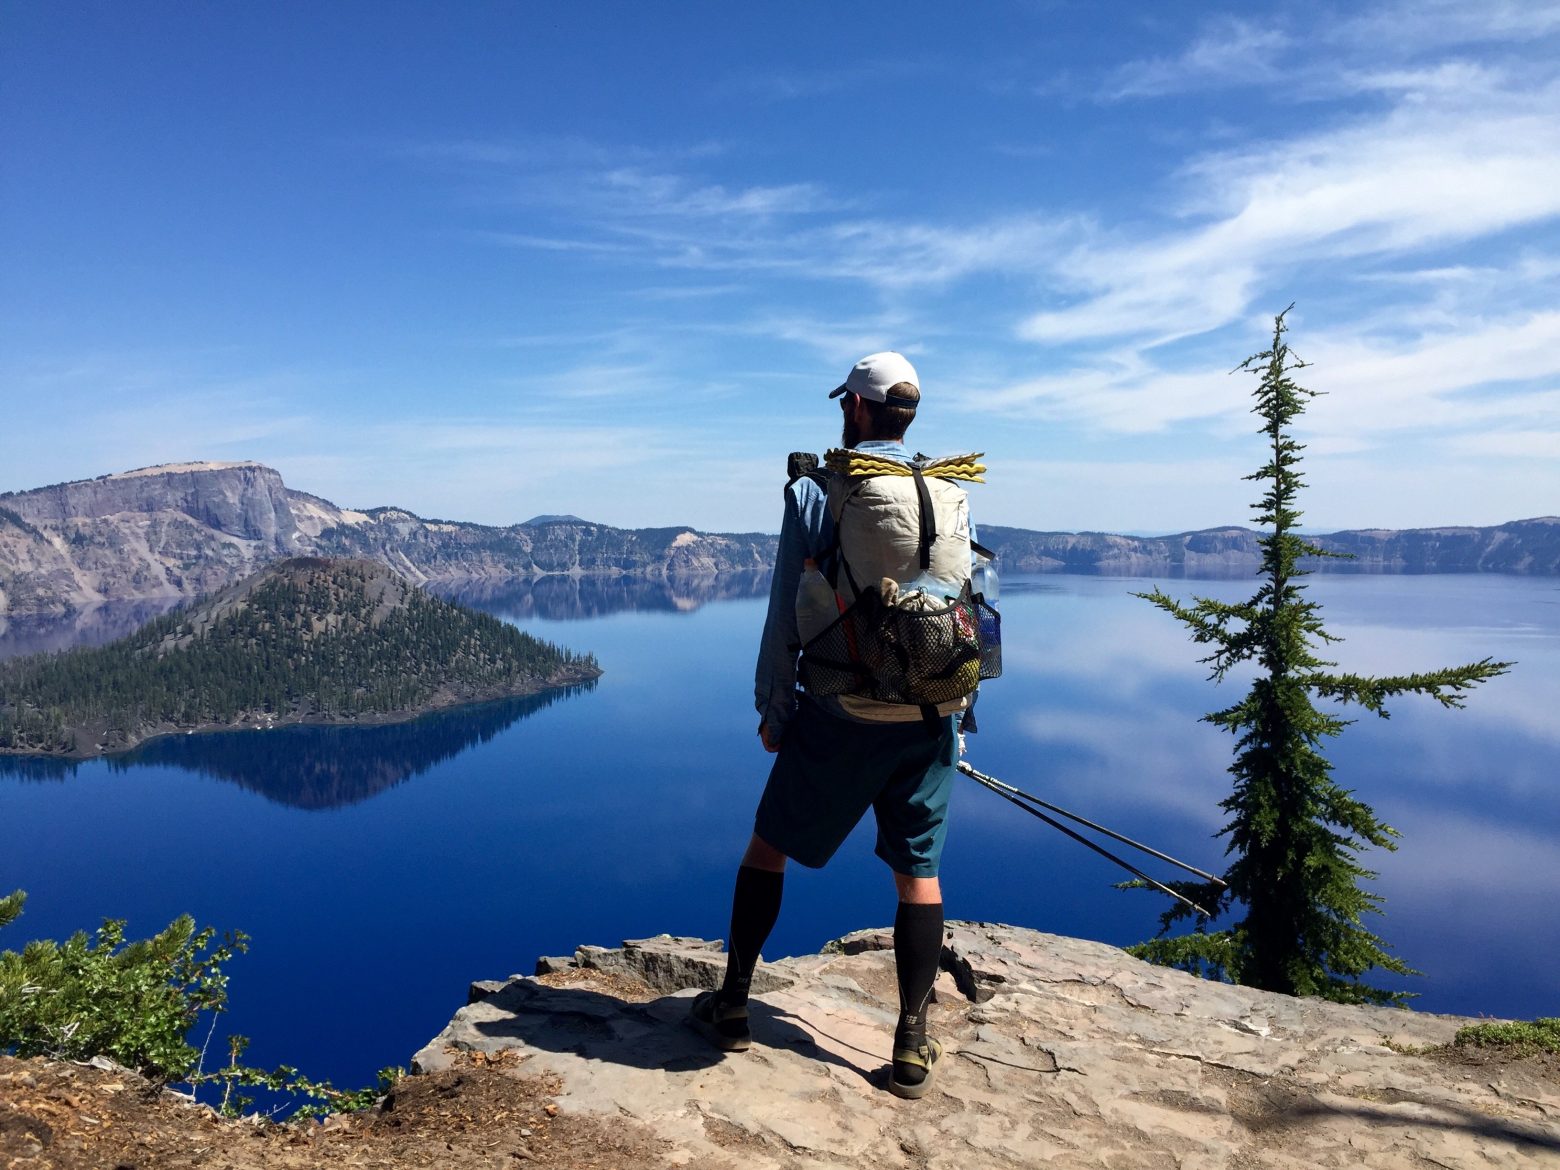 Mountain Man looking out over Crater Lake as it perfectly reflects the sky